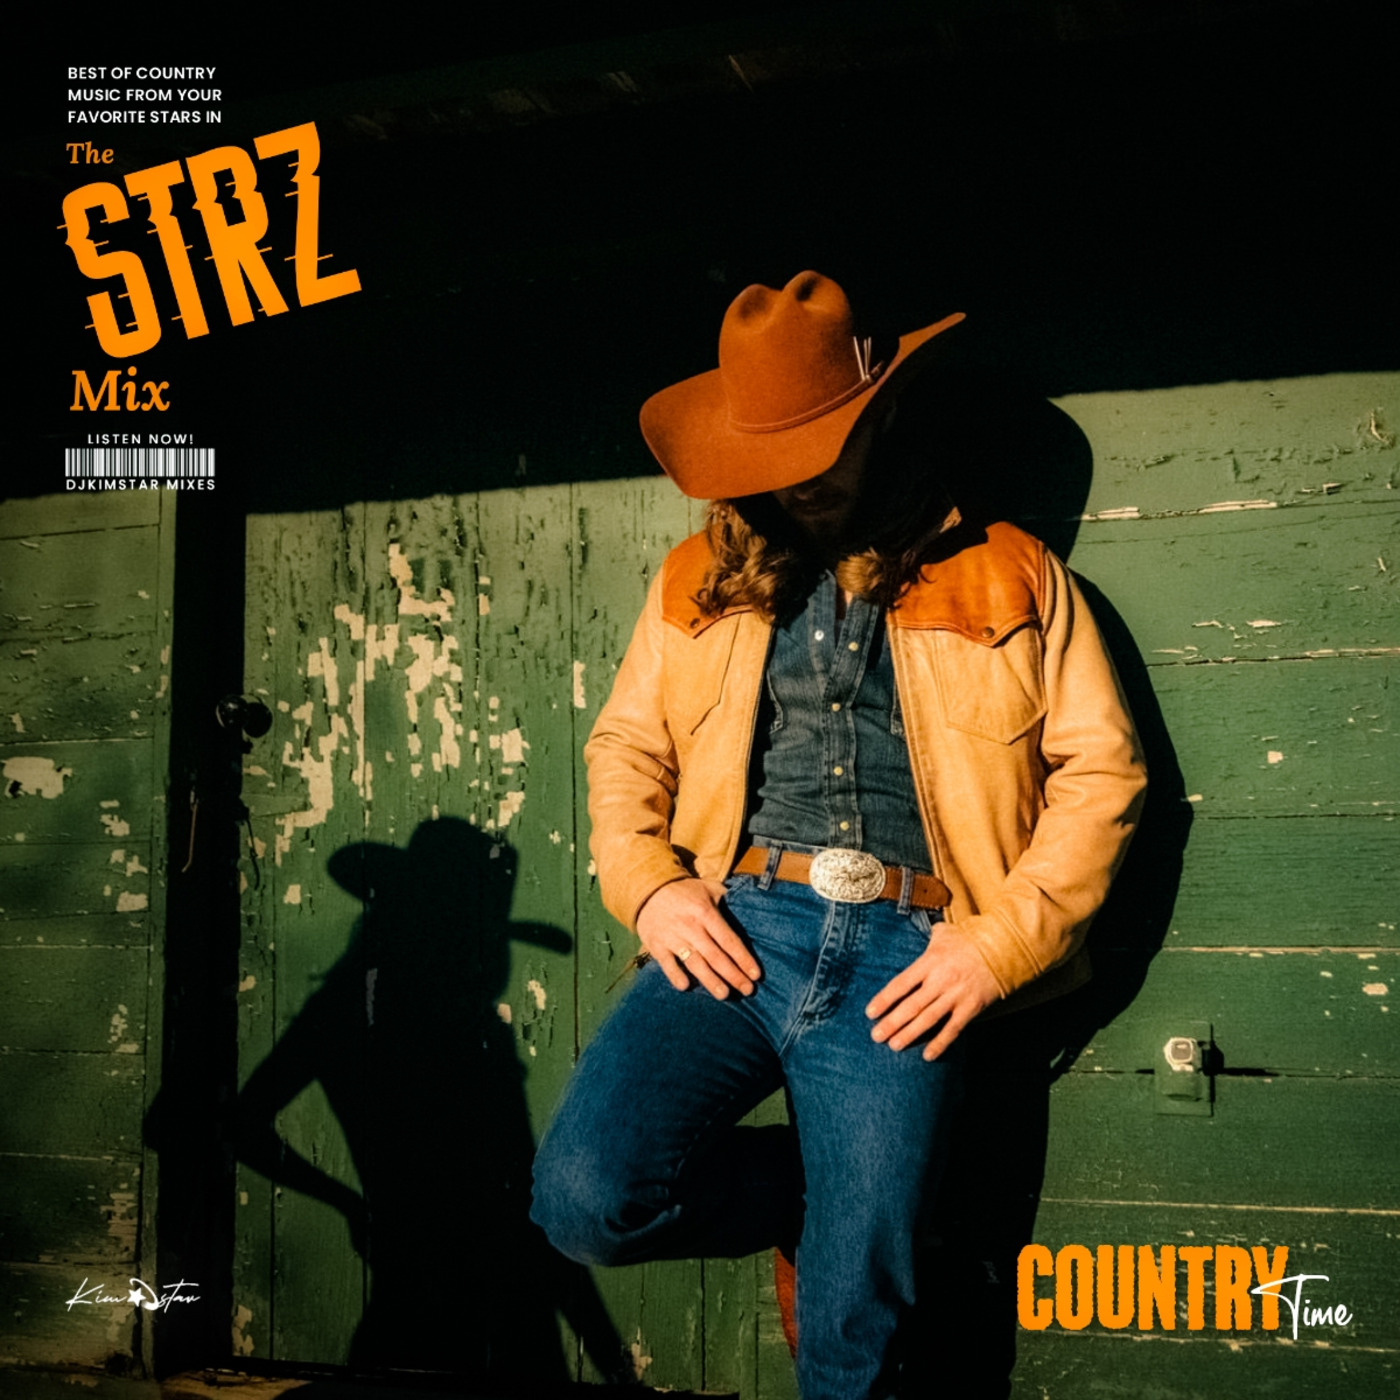 #COUNTRY strz mix series - Country music mix